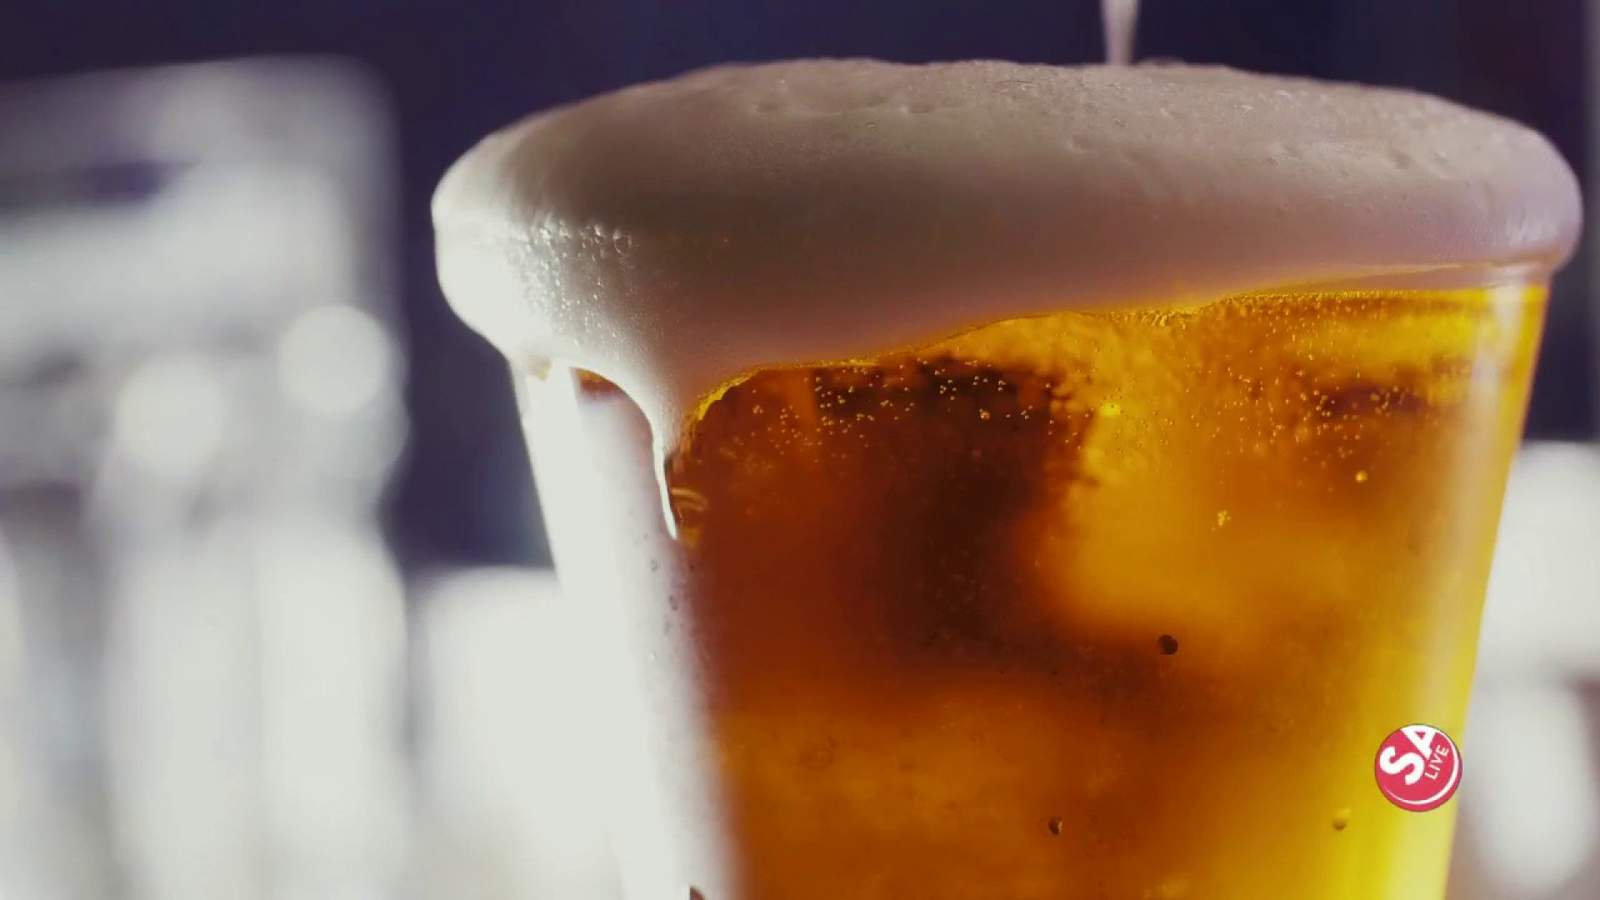 Un-brew-lievable! 2 recipes for National Beer Day